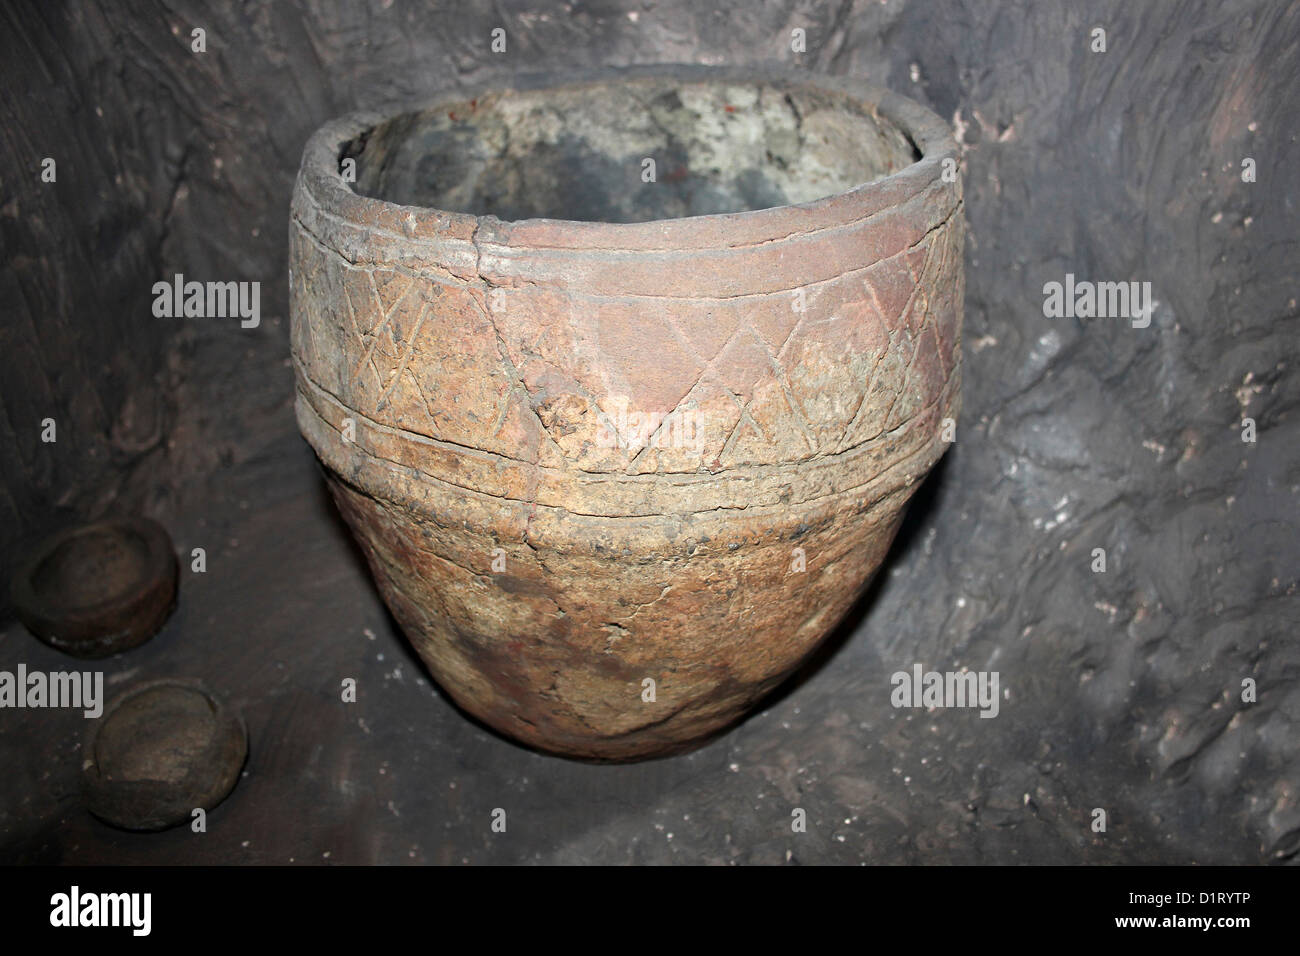 Bronze Age Burial Urn Decorated with Grooved Lines Excavated In The Yorkshire Wold, UK Stock Photo